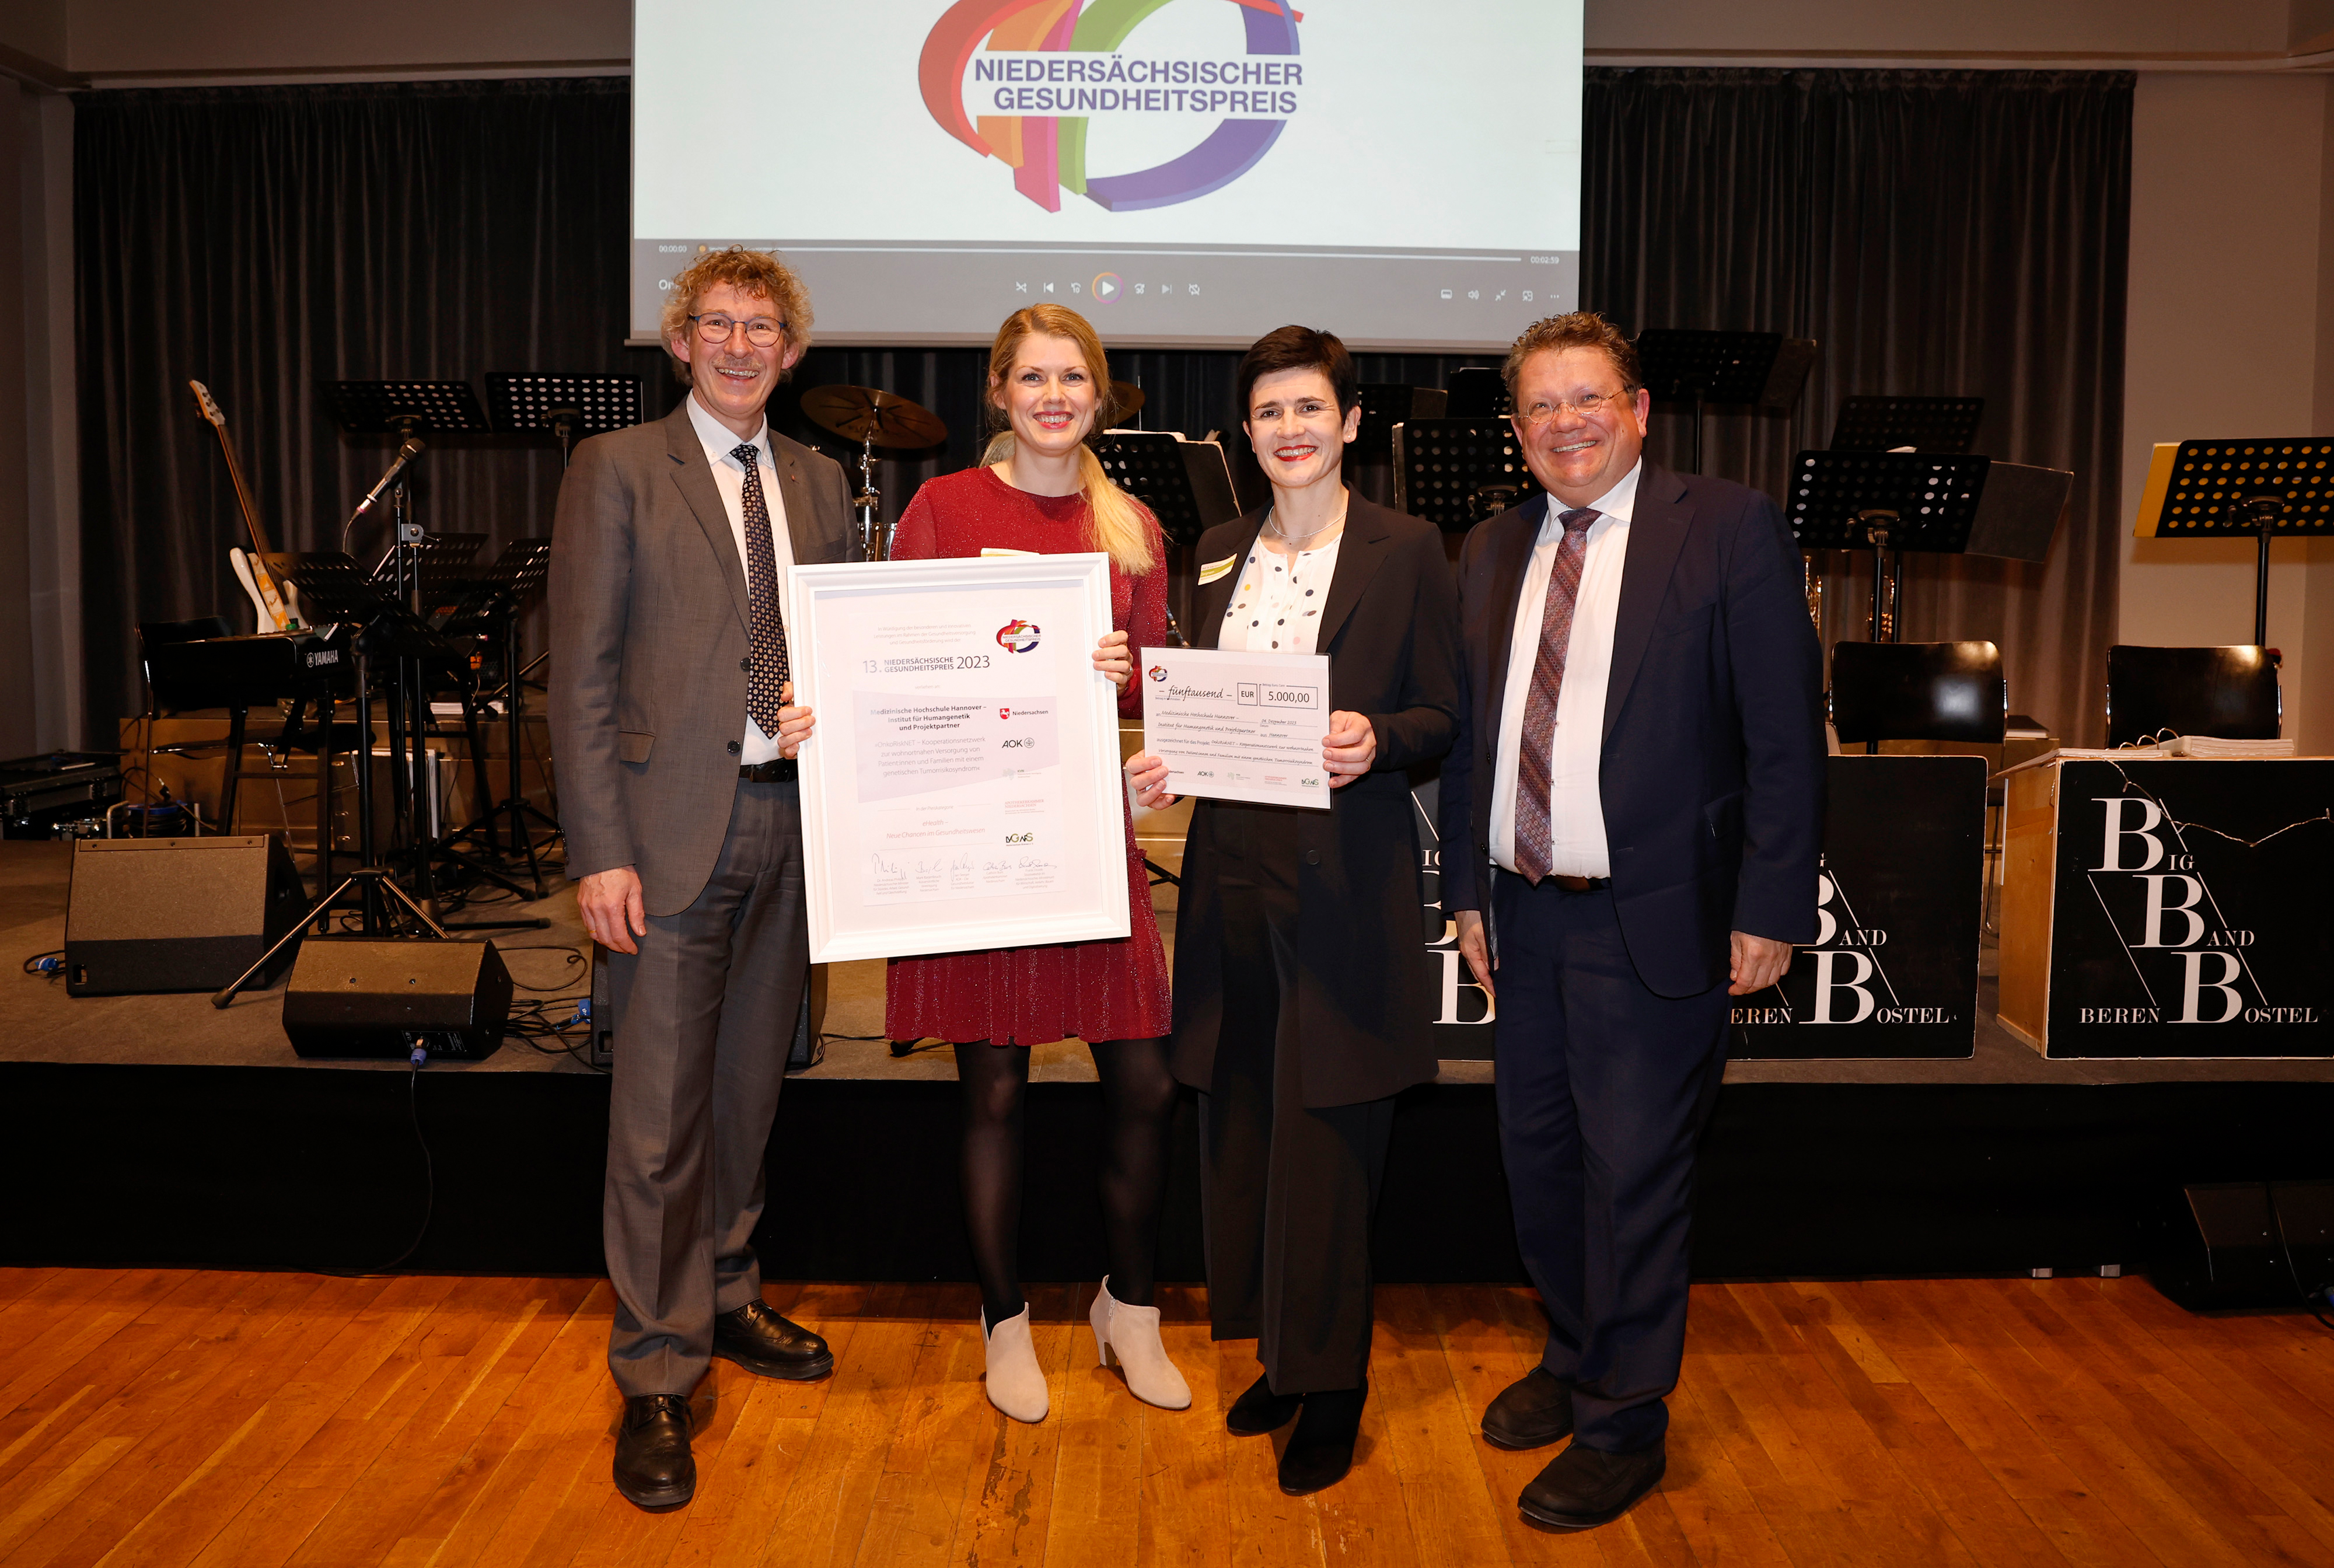 Great joy for the team of OnkoRiskNET: Dr. Johanna Tecklenburg (second from the left) and Professor Dr. Anke Bergmann (third from the left) receiving the award from State Secretary Frank Doods (left) and Health Minister Dr. Andreas Philippi (right). Copyright: Lars Kaletta